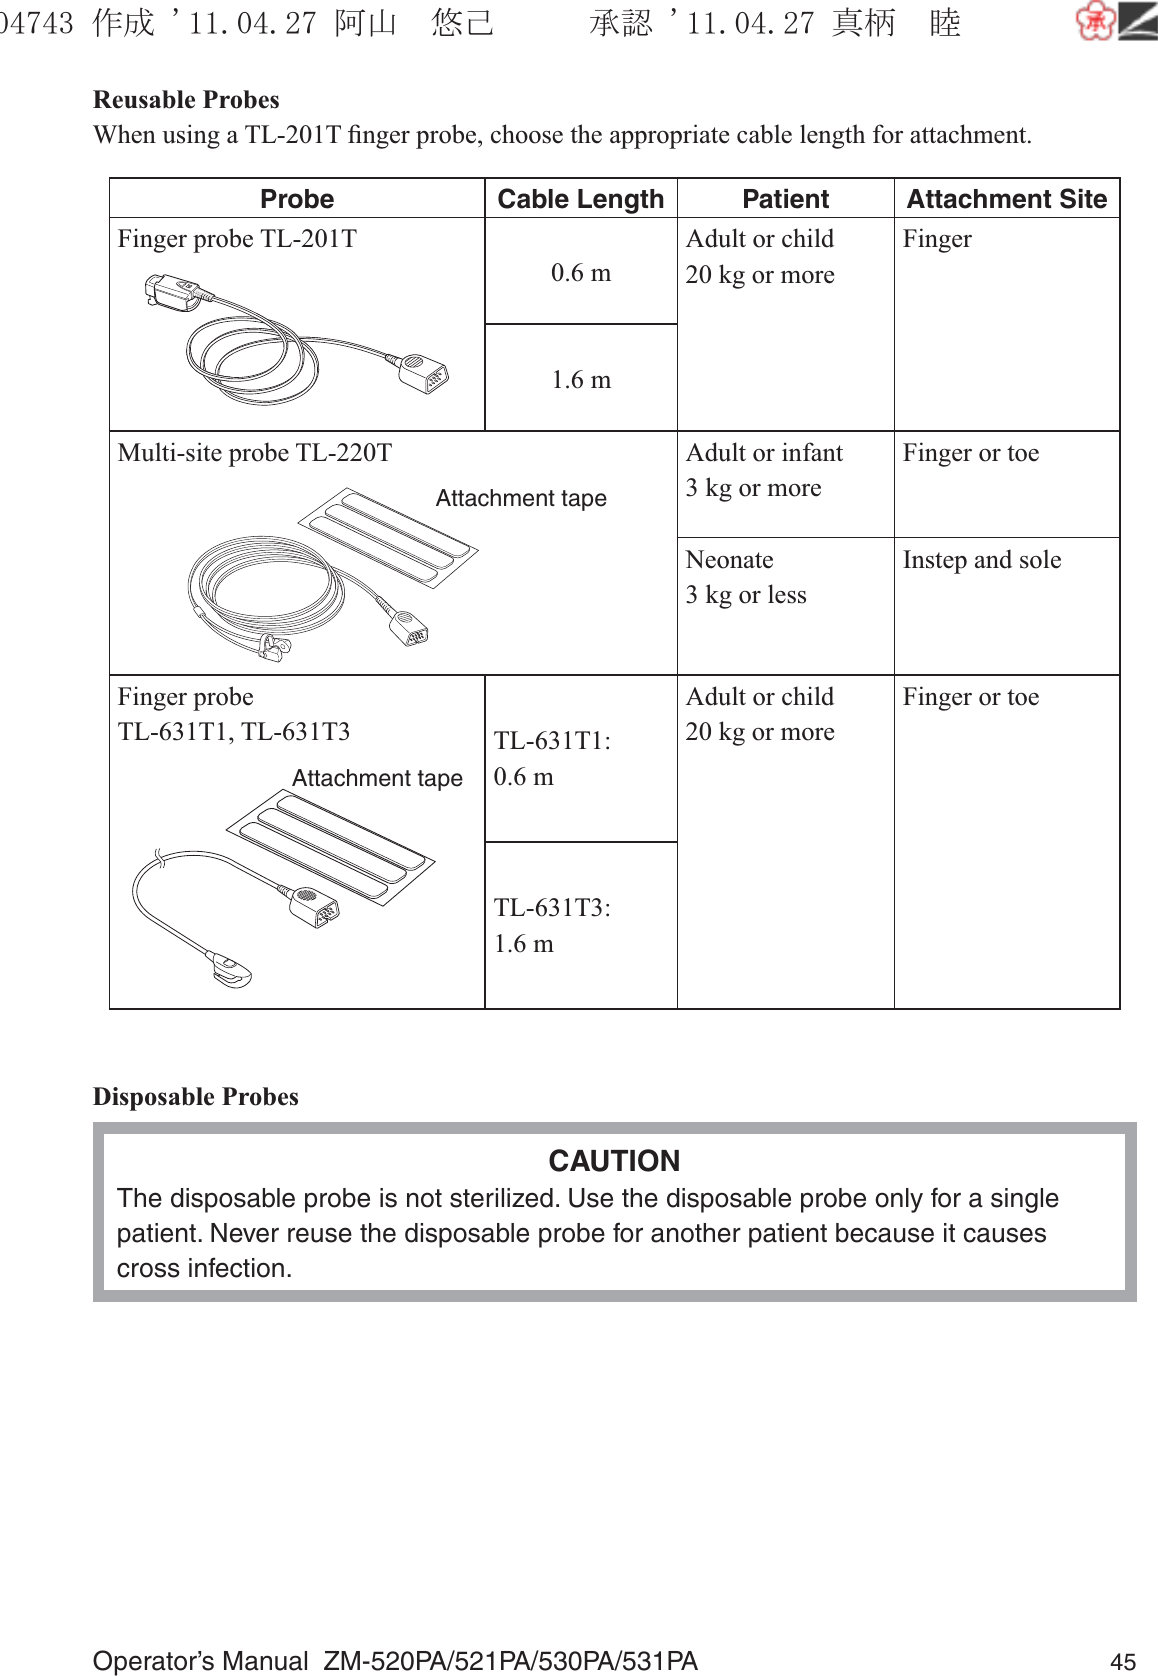 Operator’s Manual  ZM-520PA/521PA/530PA/531PA 45Reusable ProbesWhen using a TL-201T ﬁnger probe, choose the appropriate cable length for attachment.Probe Cable Length Patient Attachment SiteFinger probe TL-201T0.6 mAdult or child20 kg or moreFinger1.6 mMulti-site probe TL-220TAttachment tapeAdult or infant3 kg or moreFinger or toeNeonate3 kg or lessInstep and soleFinger probeTL-631T1, TL-631T3Attachment tapeTL-631T1: 0.6 mAdult or child20 kg or moreFinger or toeTL-631T3: 1.6 mDisposable ProbesCAUTIONThe disposable probe is not sterilized. Use the disposable probe only for a single patient. Never reuse the disposable probe for another patient because it causes cross infection.૞ᚑ㒙ጊޓᖘᏆ ᛚ⹺⌀ᨩޓ⌬